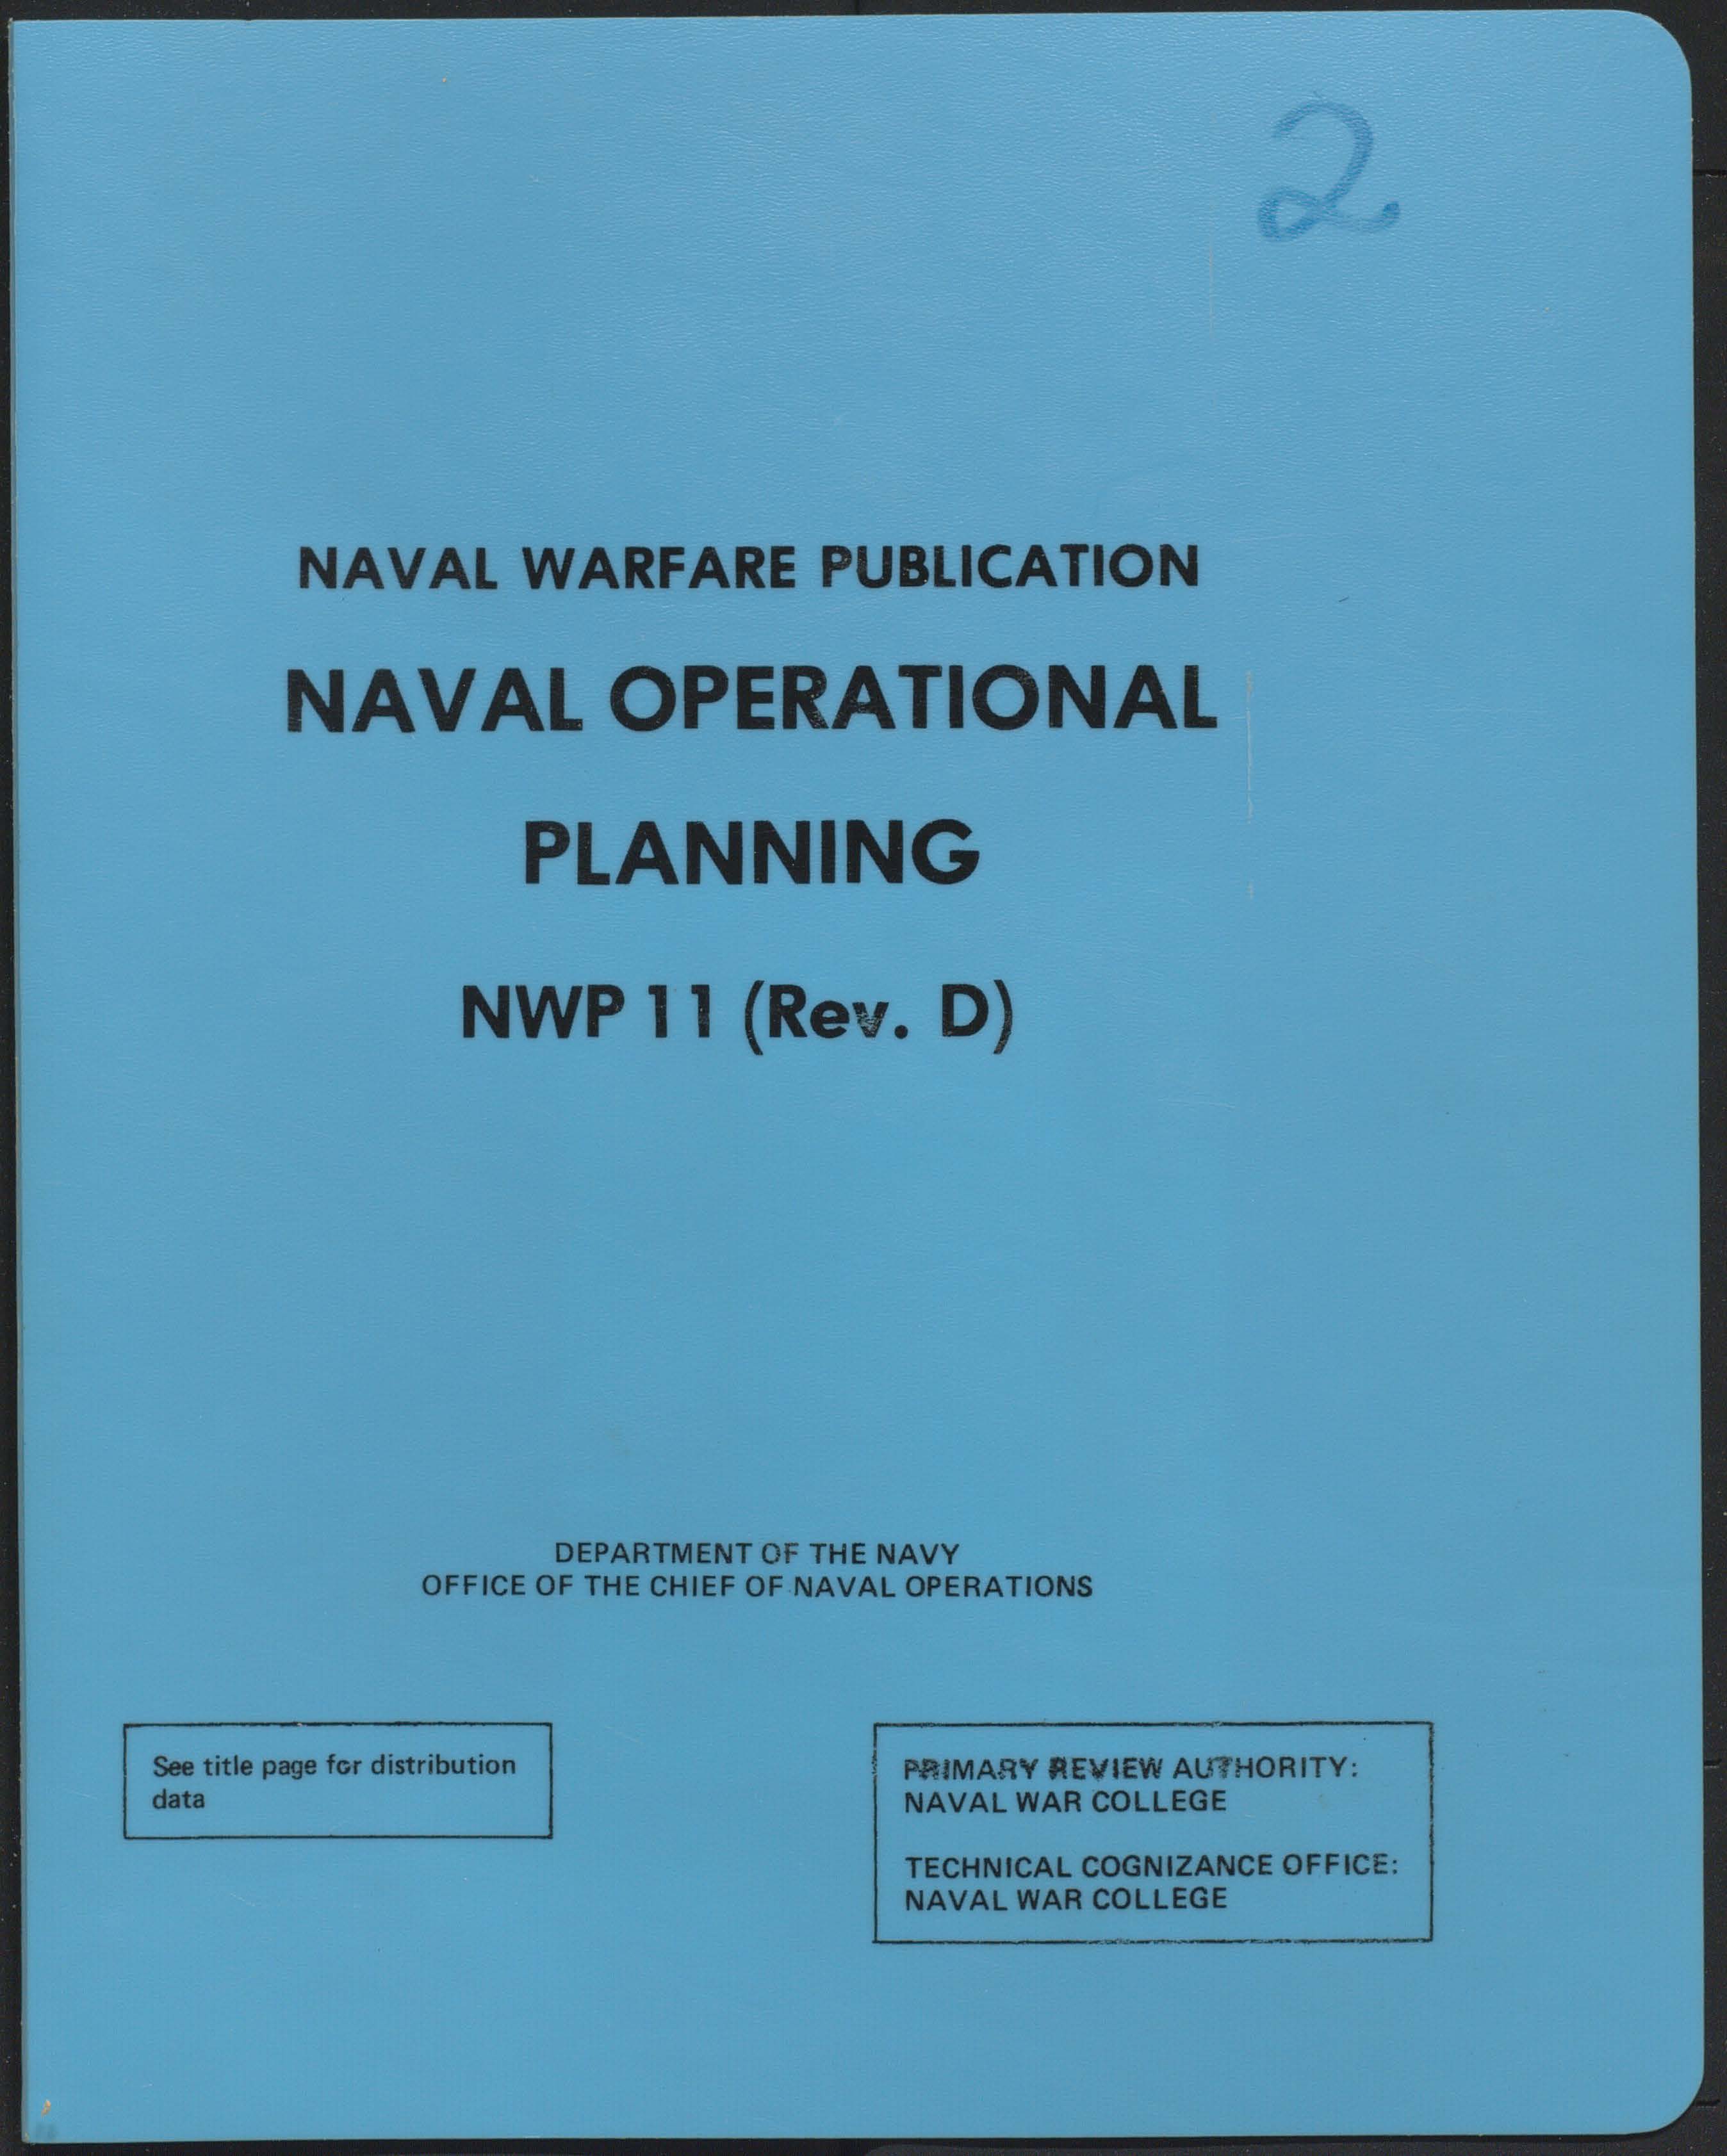 Naval Operational Planning, NWP 11 (Revision D)